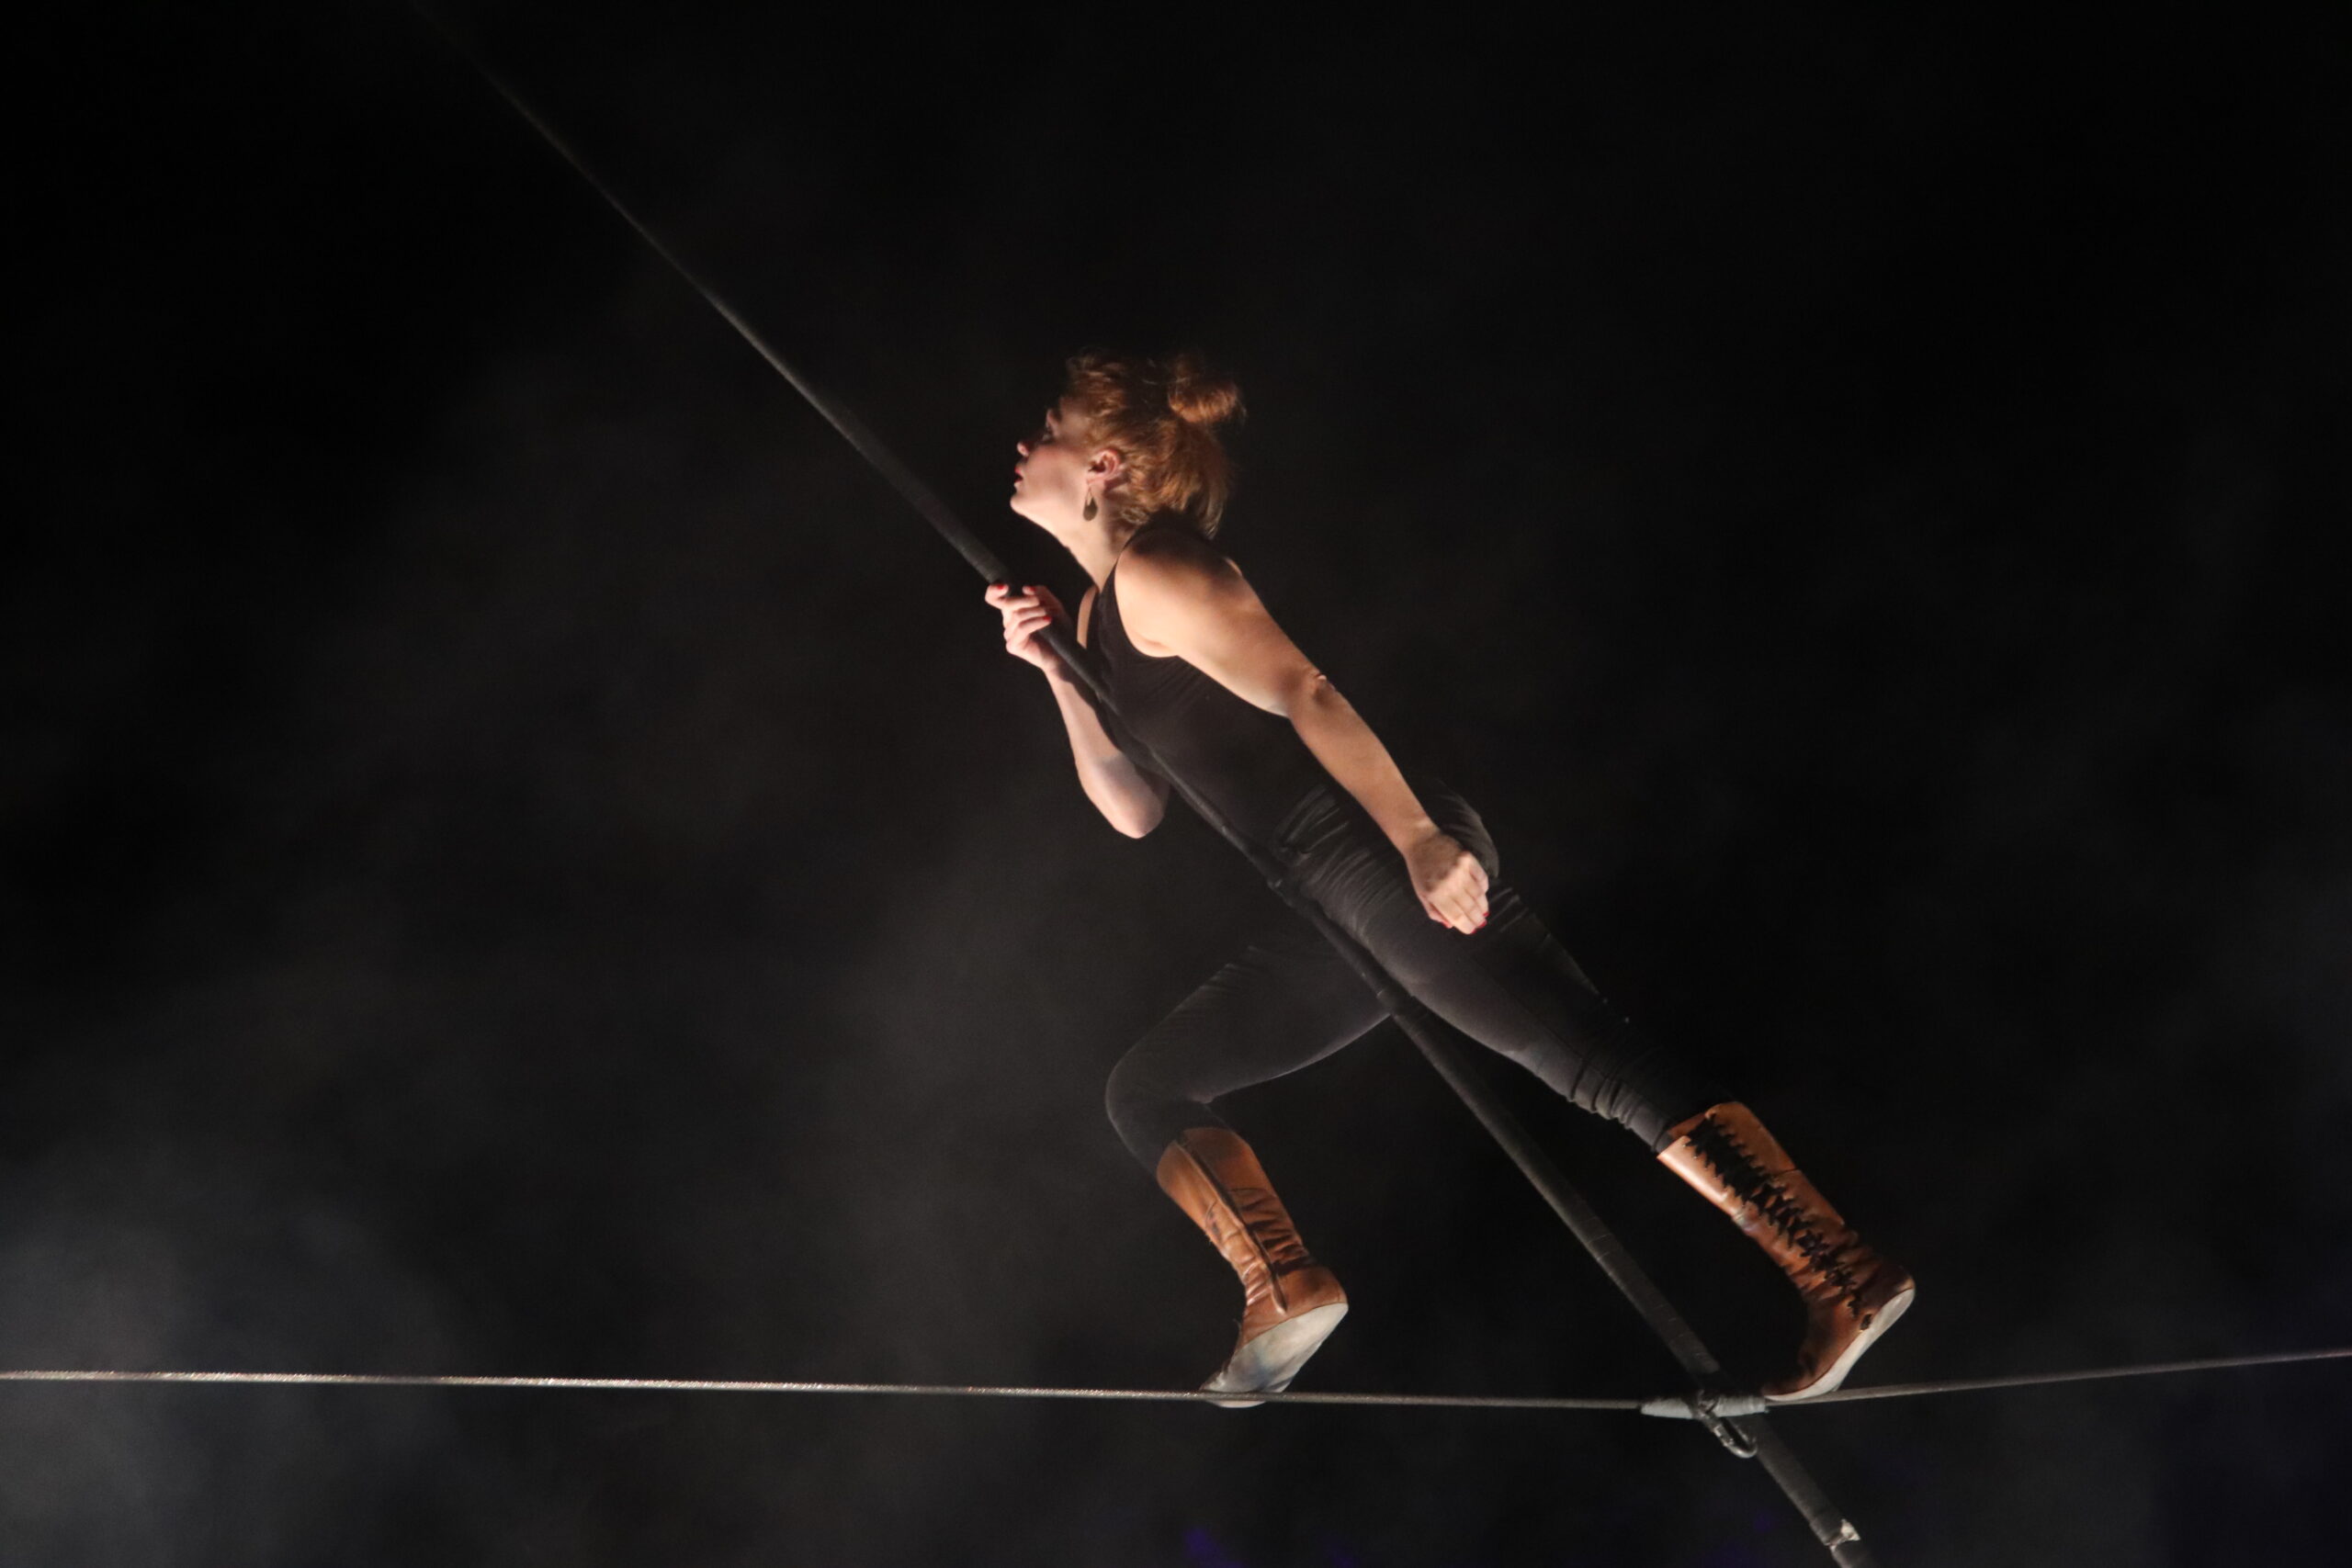 Person performing on a tightwire upside. The scene is dark with a advanced lighting display illuminating the stage. A singer performs underneath the tightwire